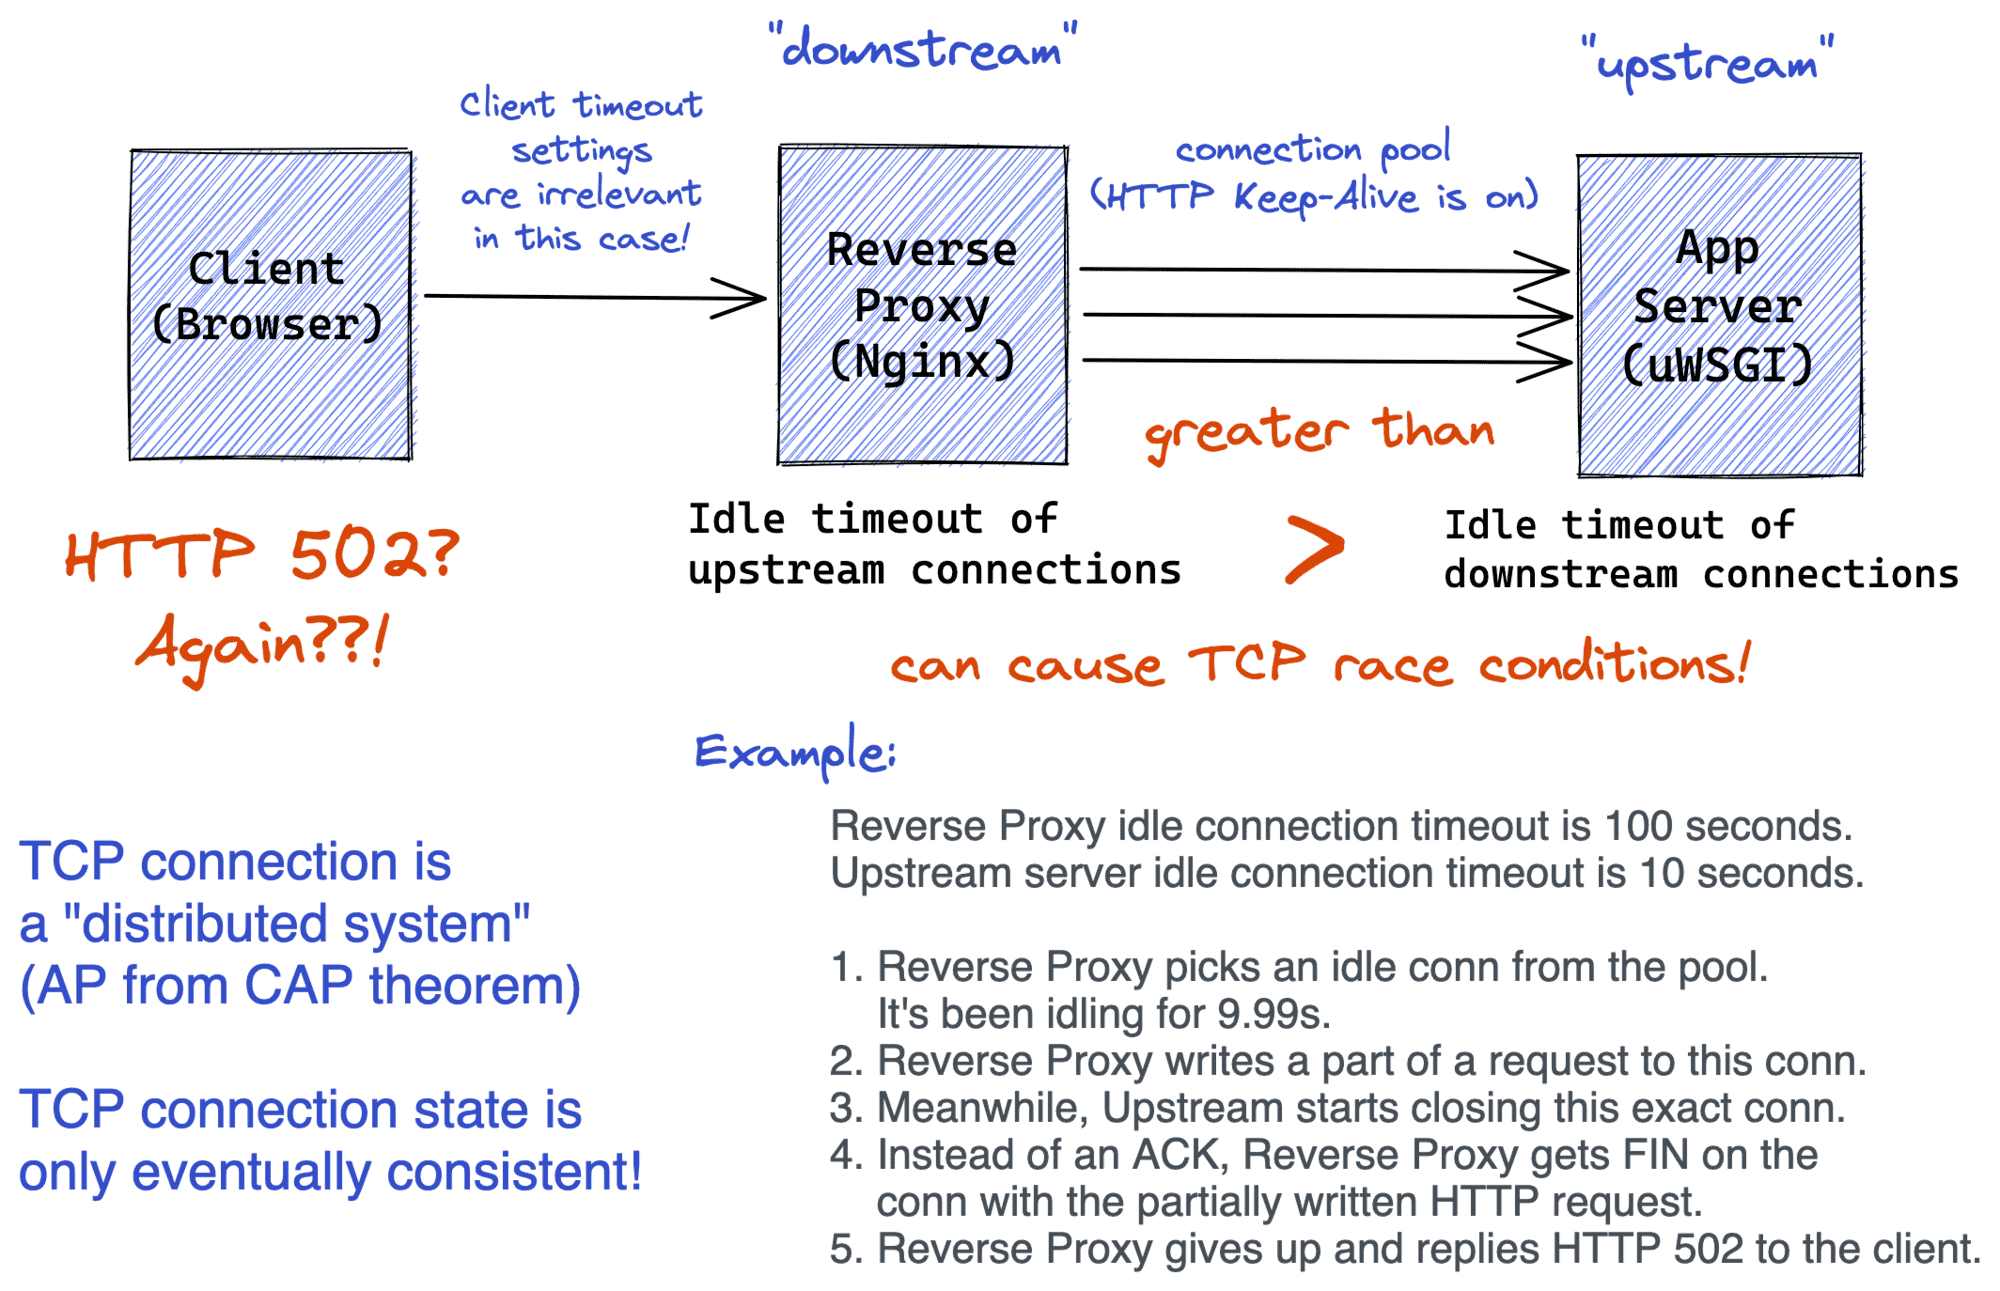 How HTTP Keep-Alive between a reverse proxy and an upstream can cause HTTP 502s due to a TCP race condition.